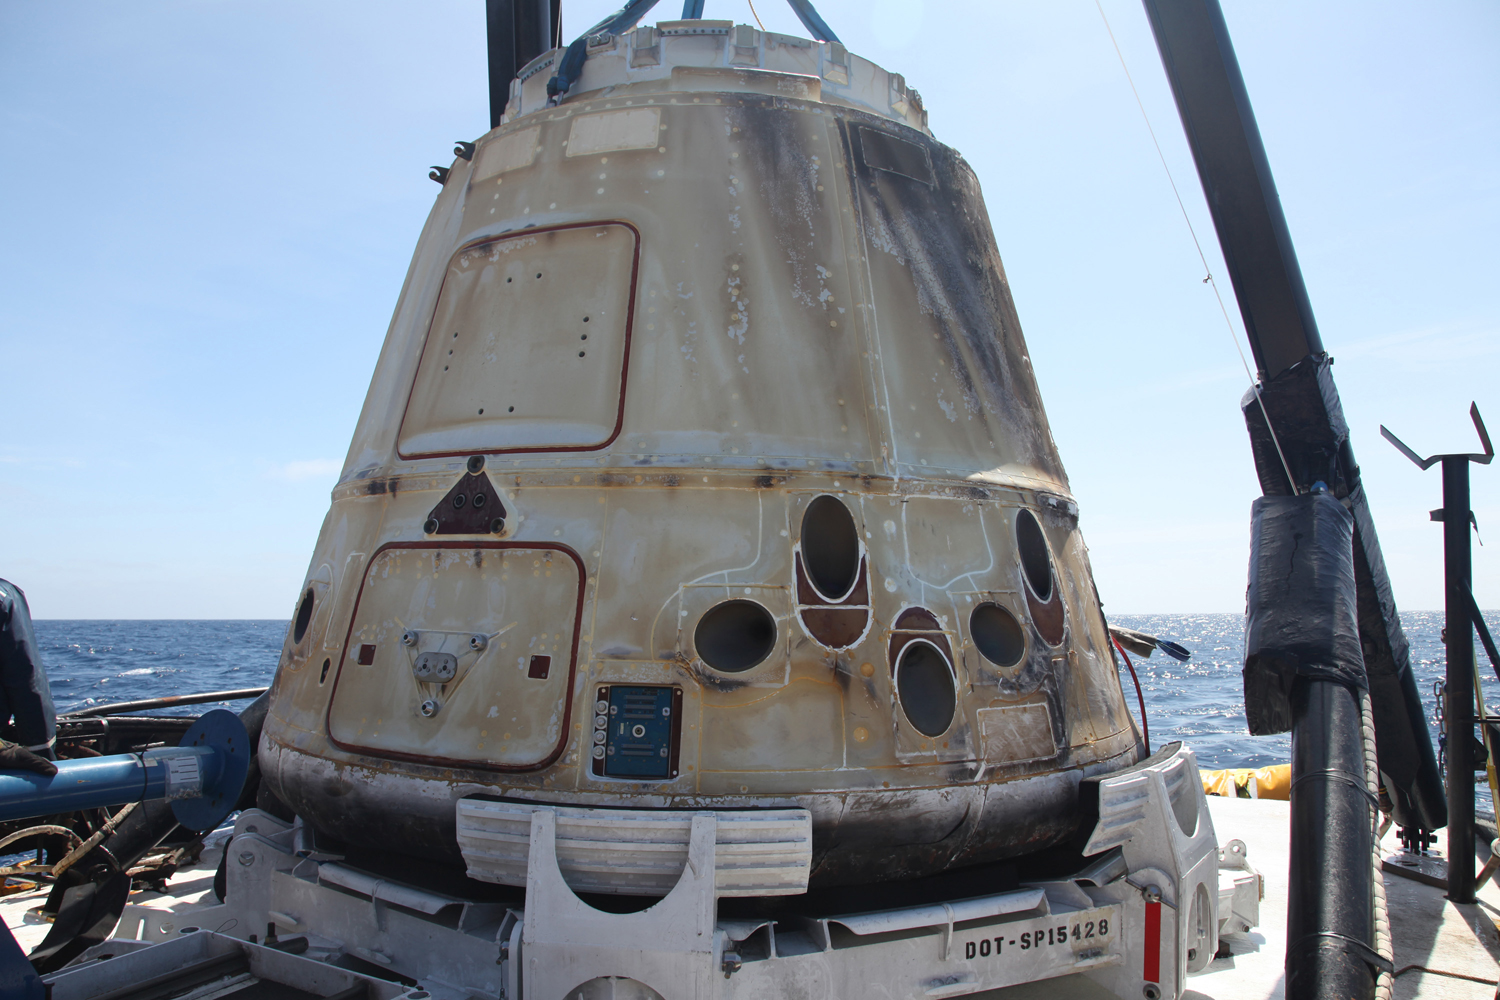 SpaceX's Dragon on the recovery boat on April 13, 2013.